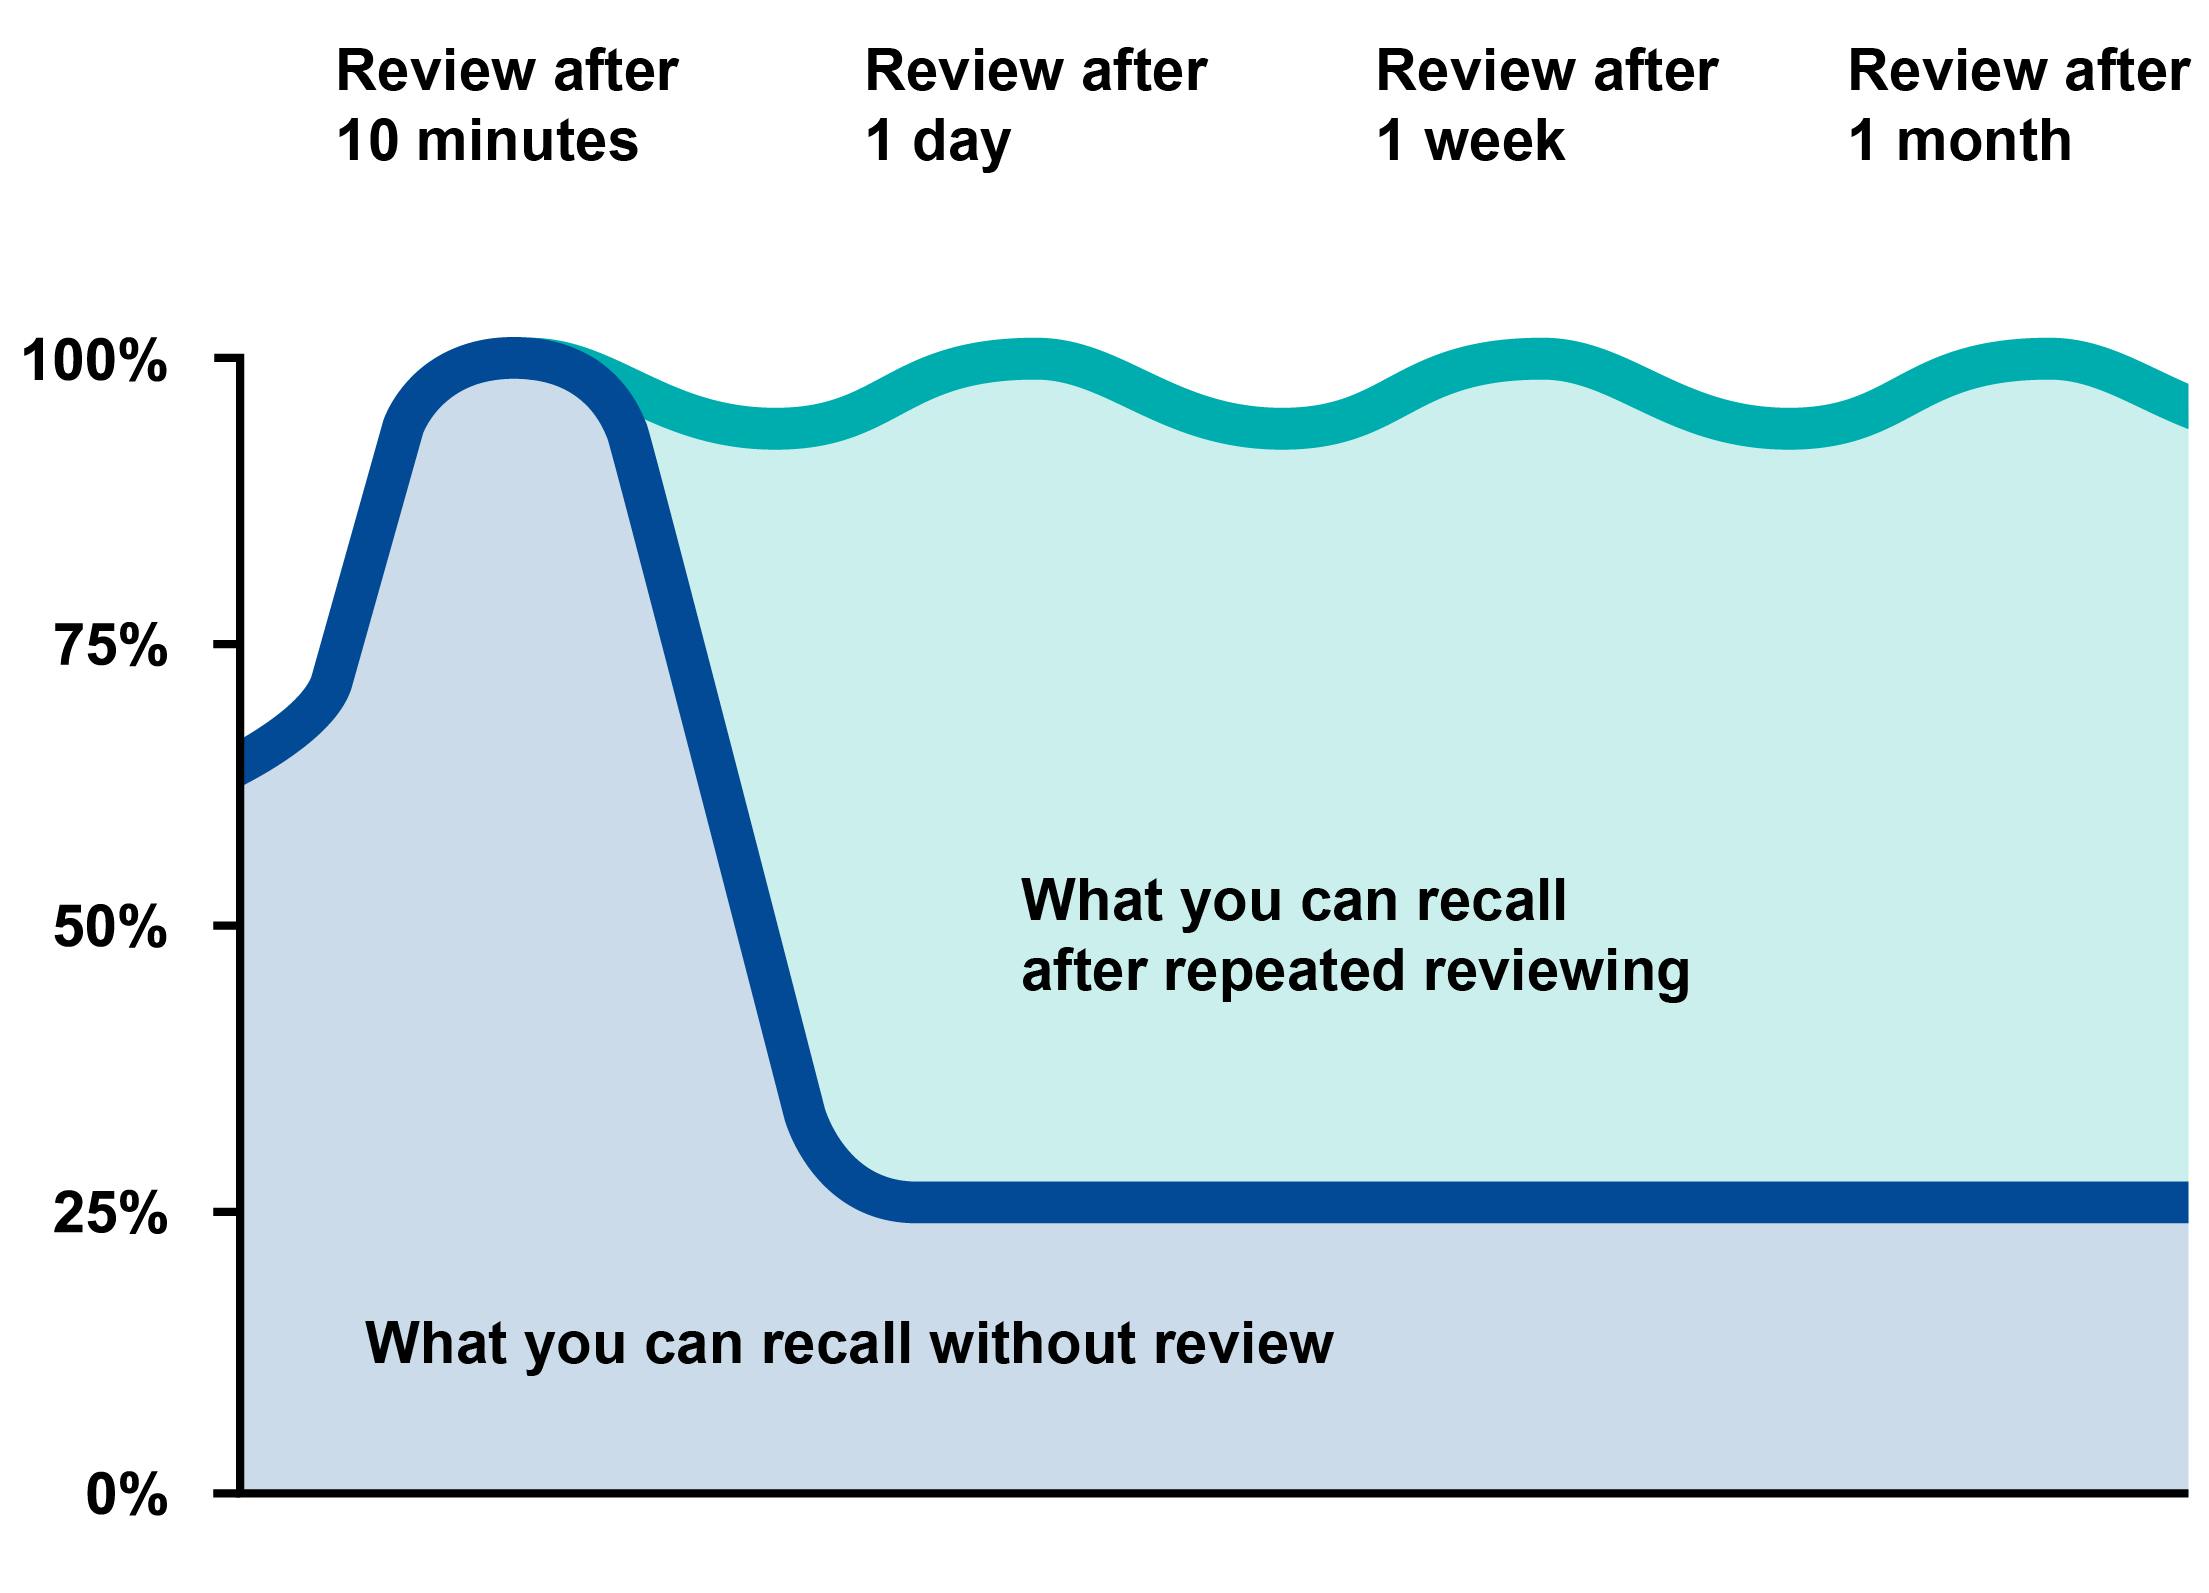 Graph showing percentages of what you can recall after repeated reviewing.